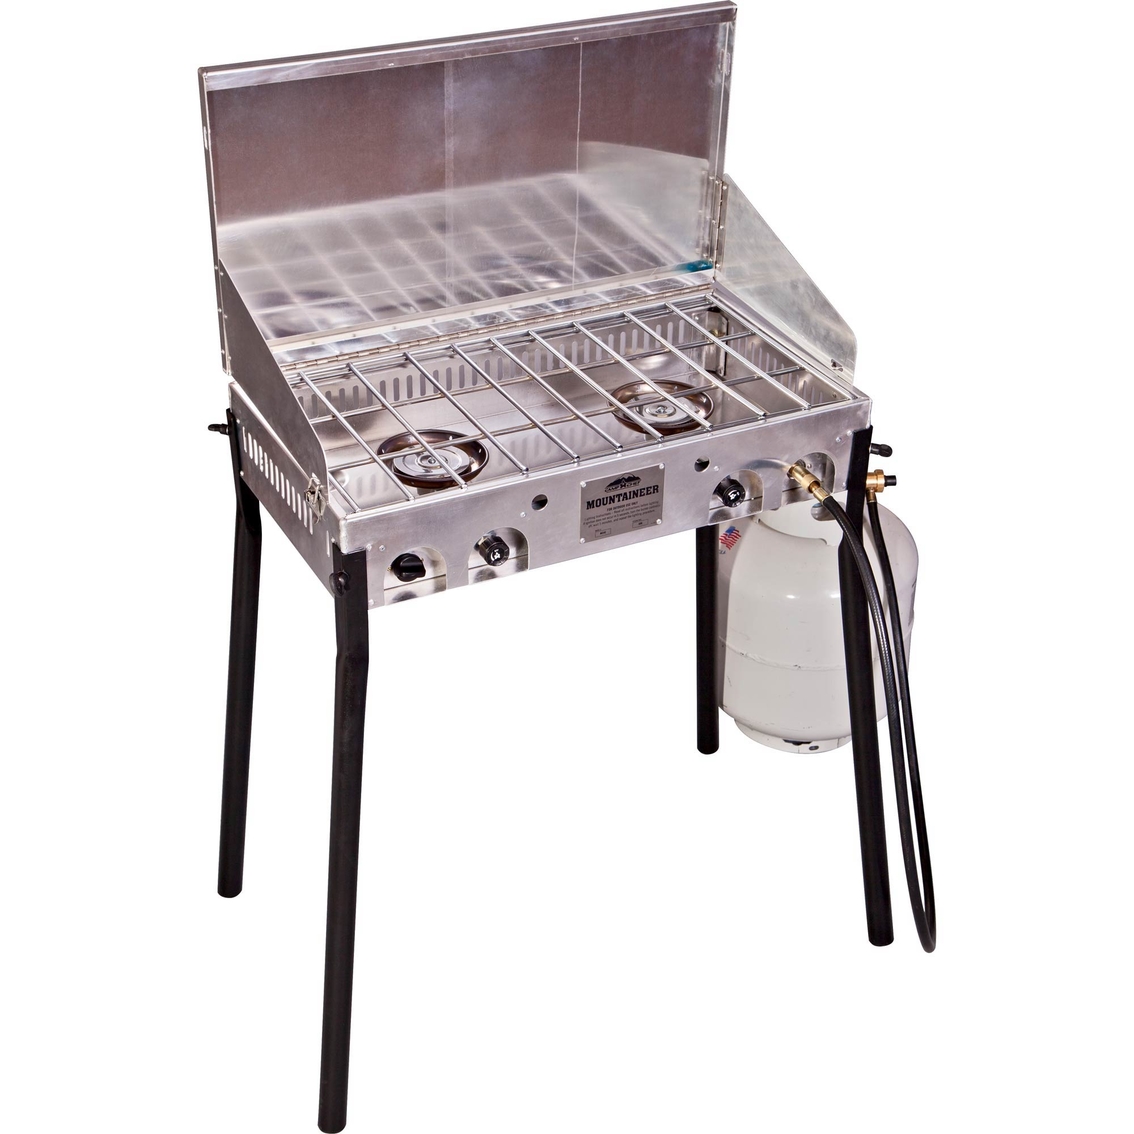 Camp Chef Mountaineer 2 Burner Aluminum Stove - Image 2 of 4